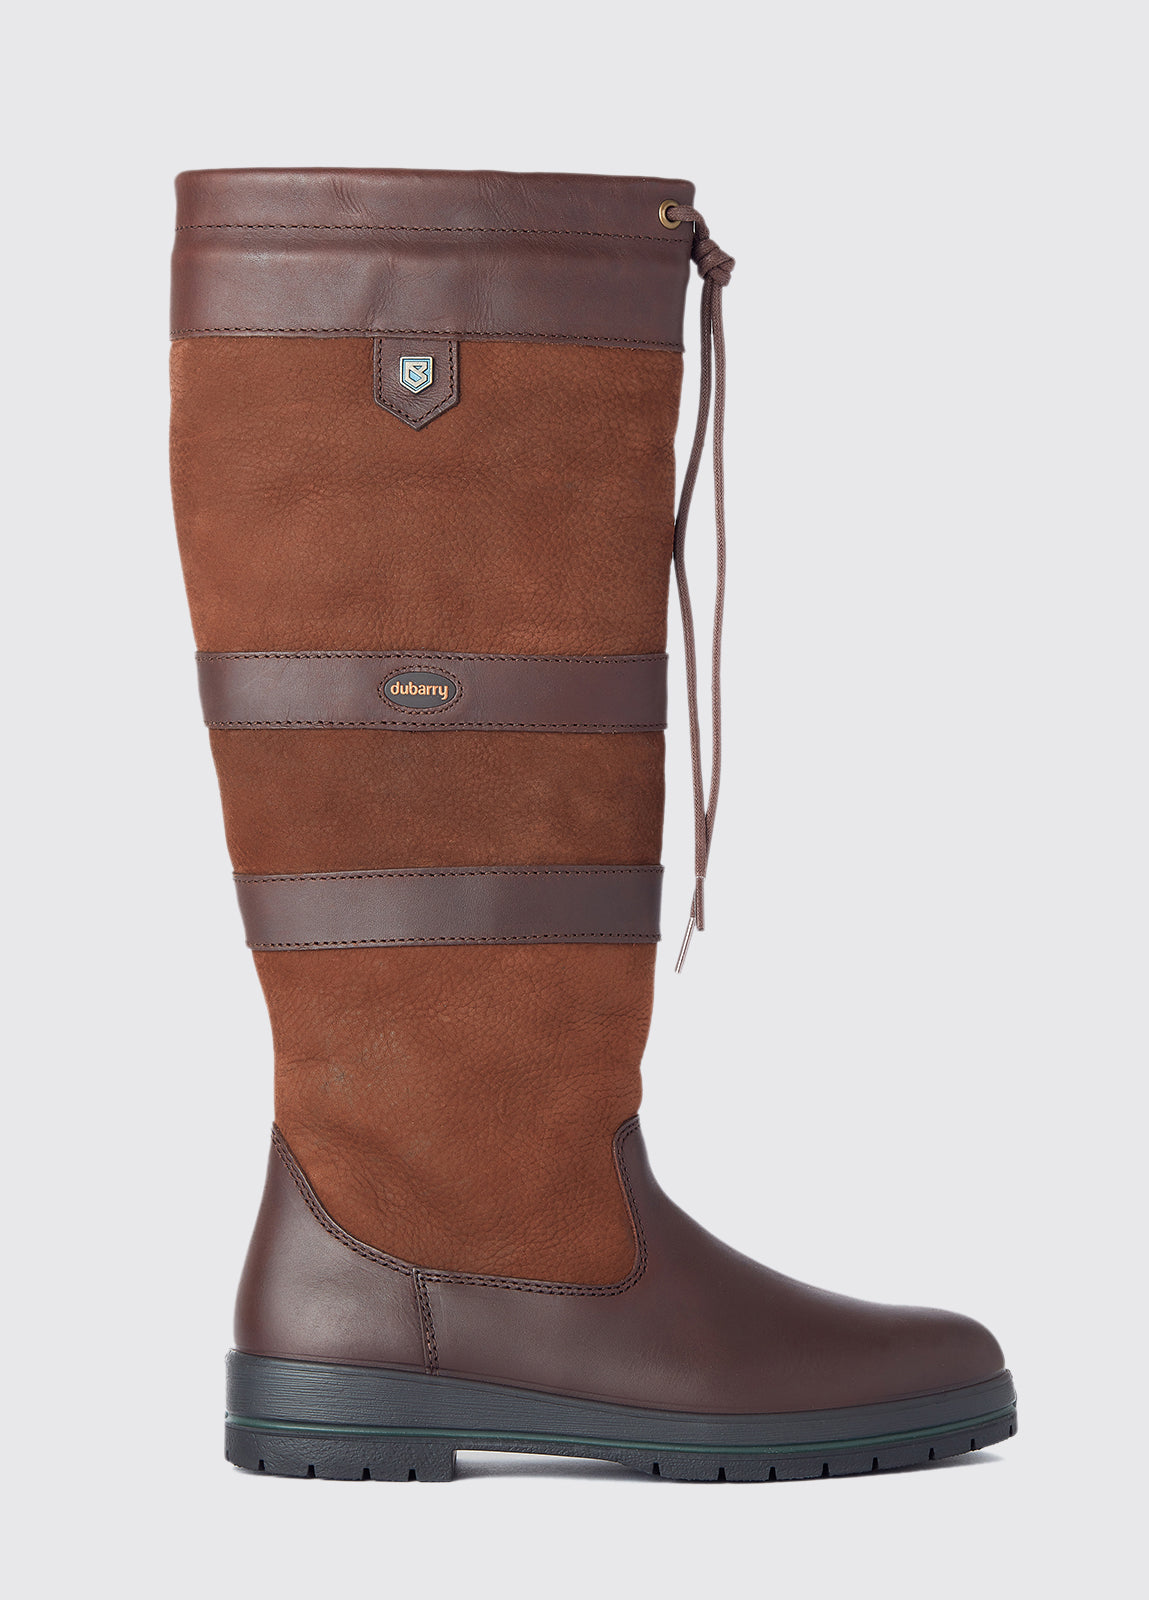 Dubarry Galway Country Boot in Walnut